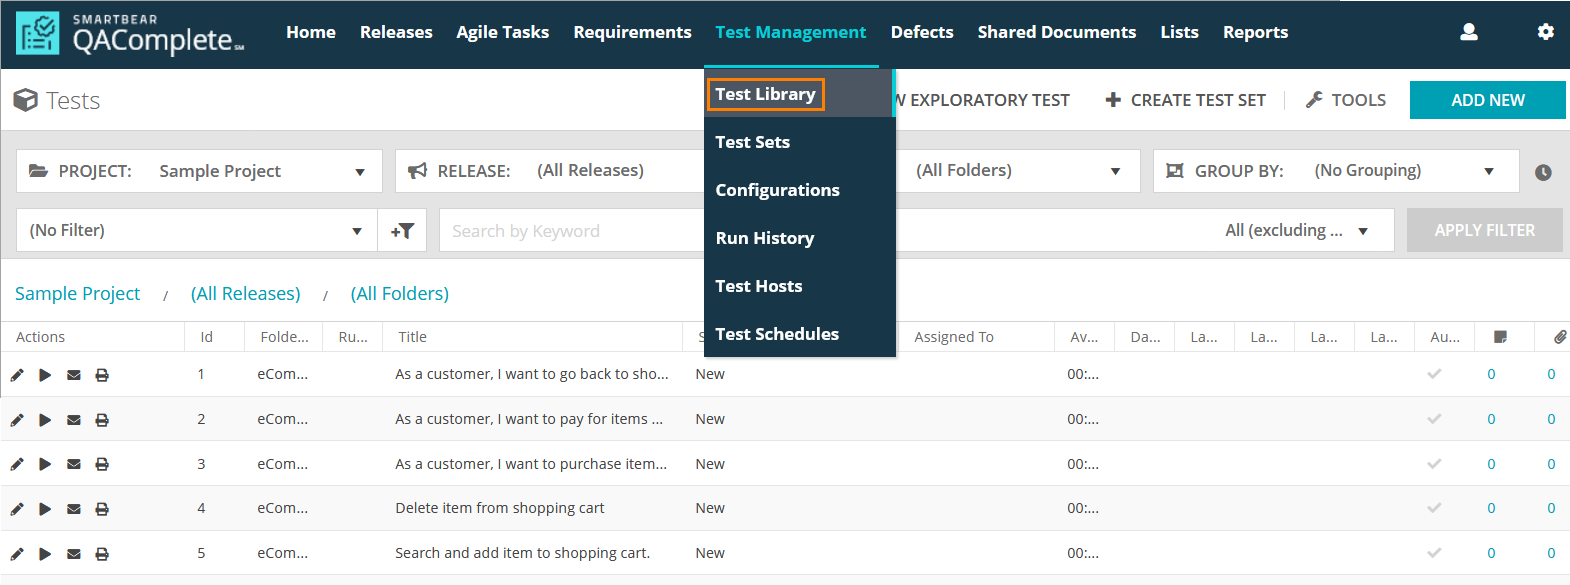 Test Management: The Test Library link on the toolbar